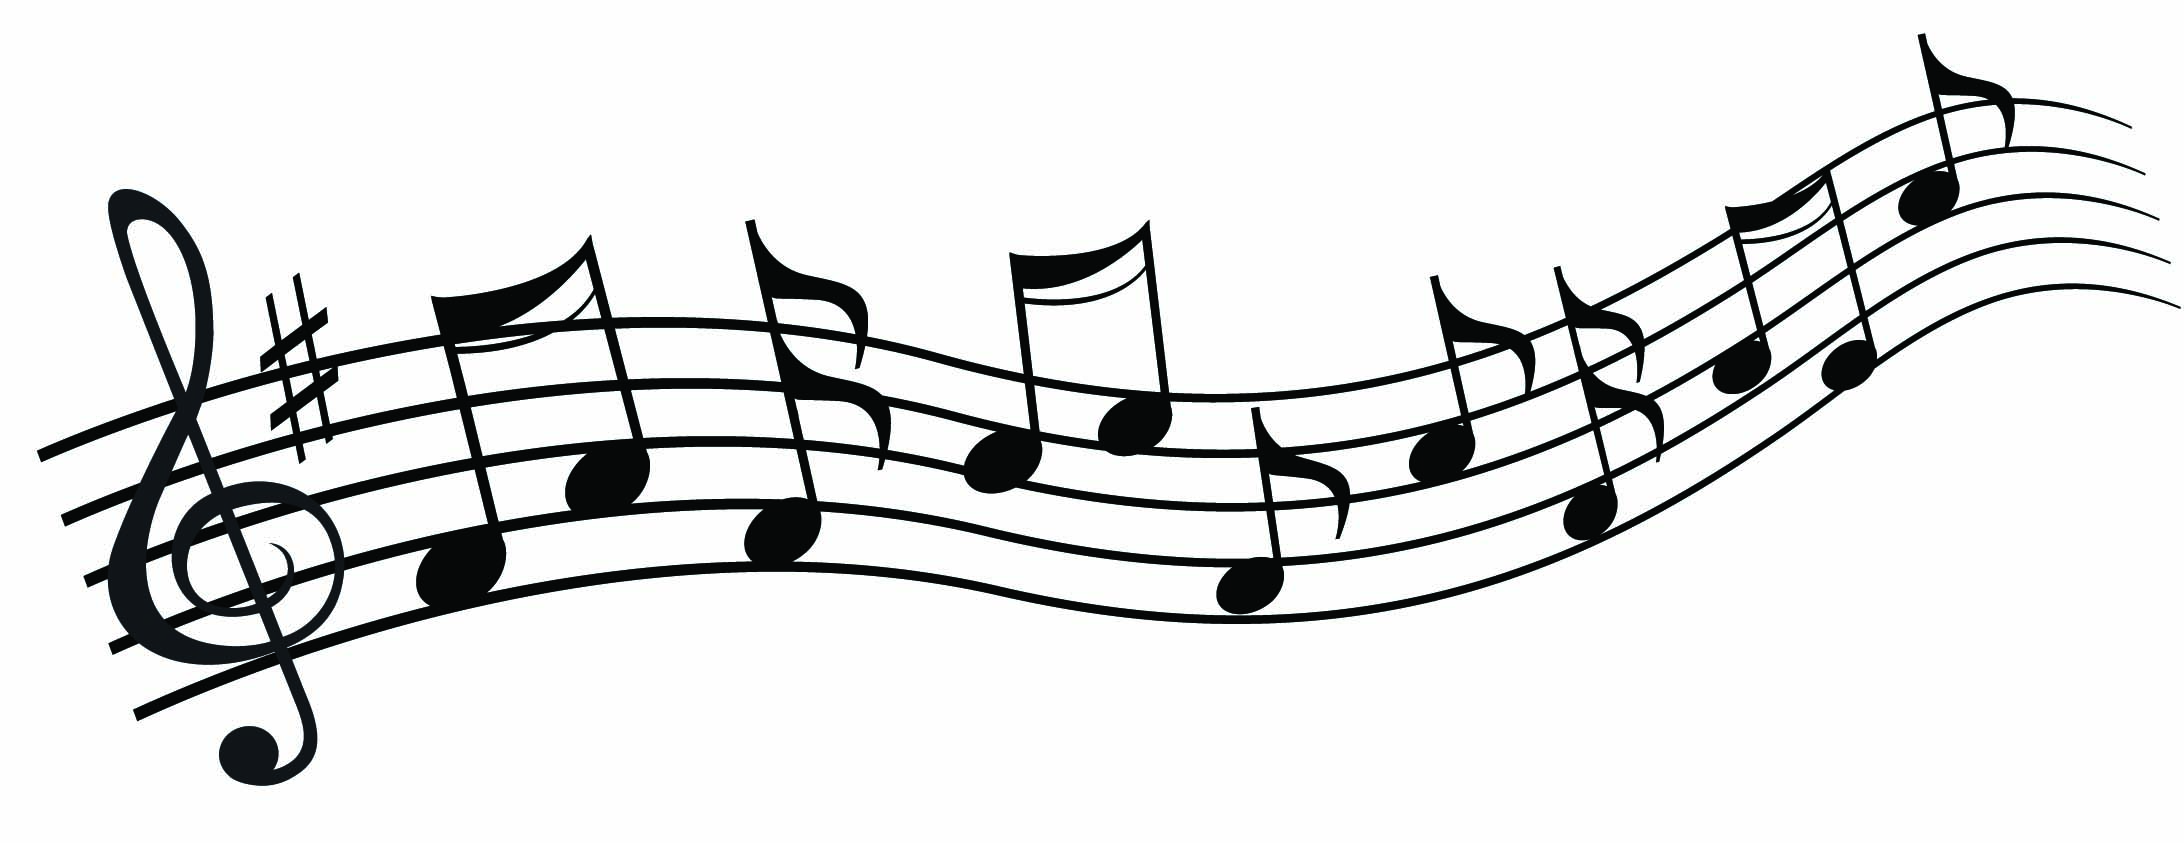 Music notes musical clip art free music note clipart image 1 9